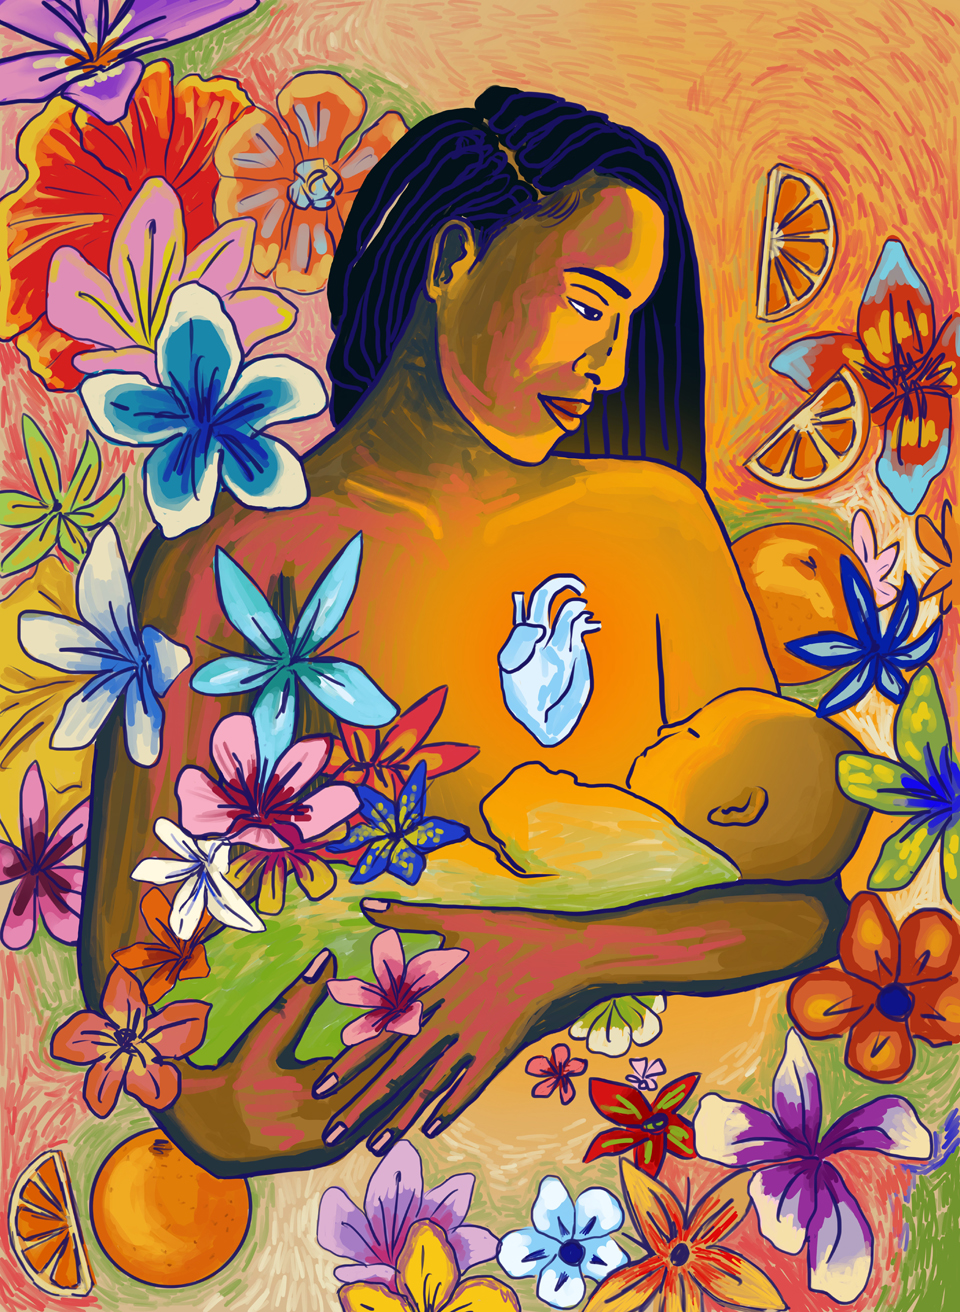 Illustration of woman nursing infant with flowers all around them.